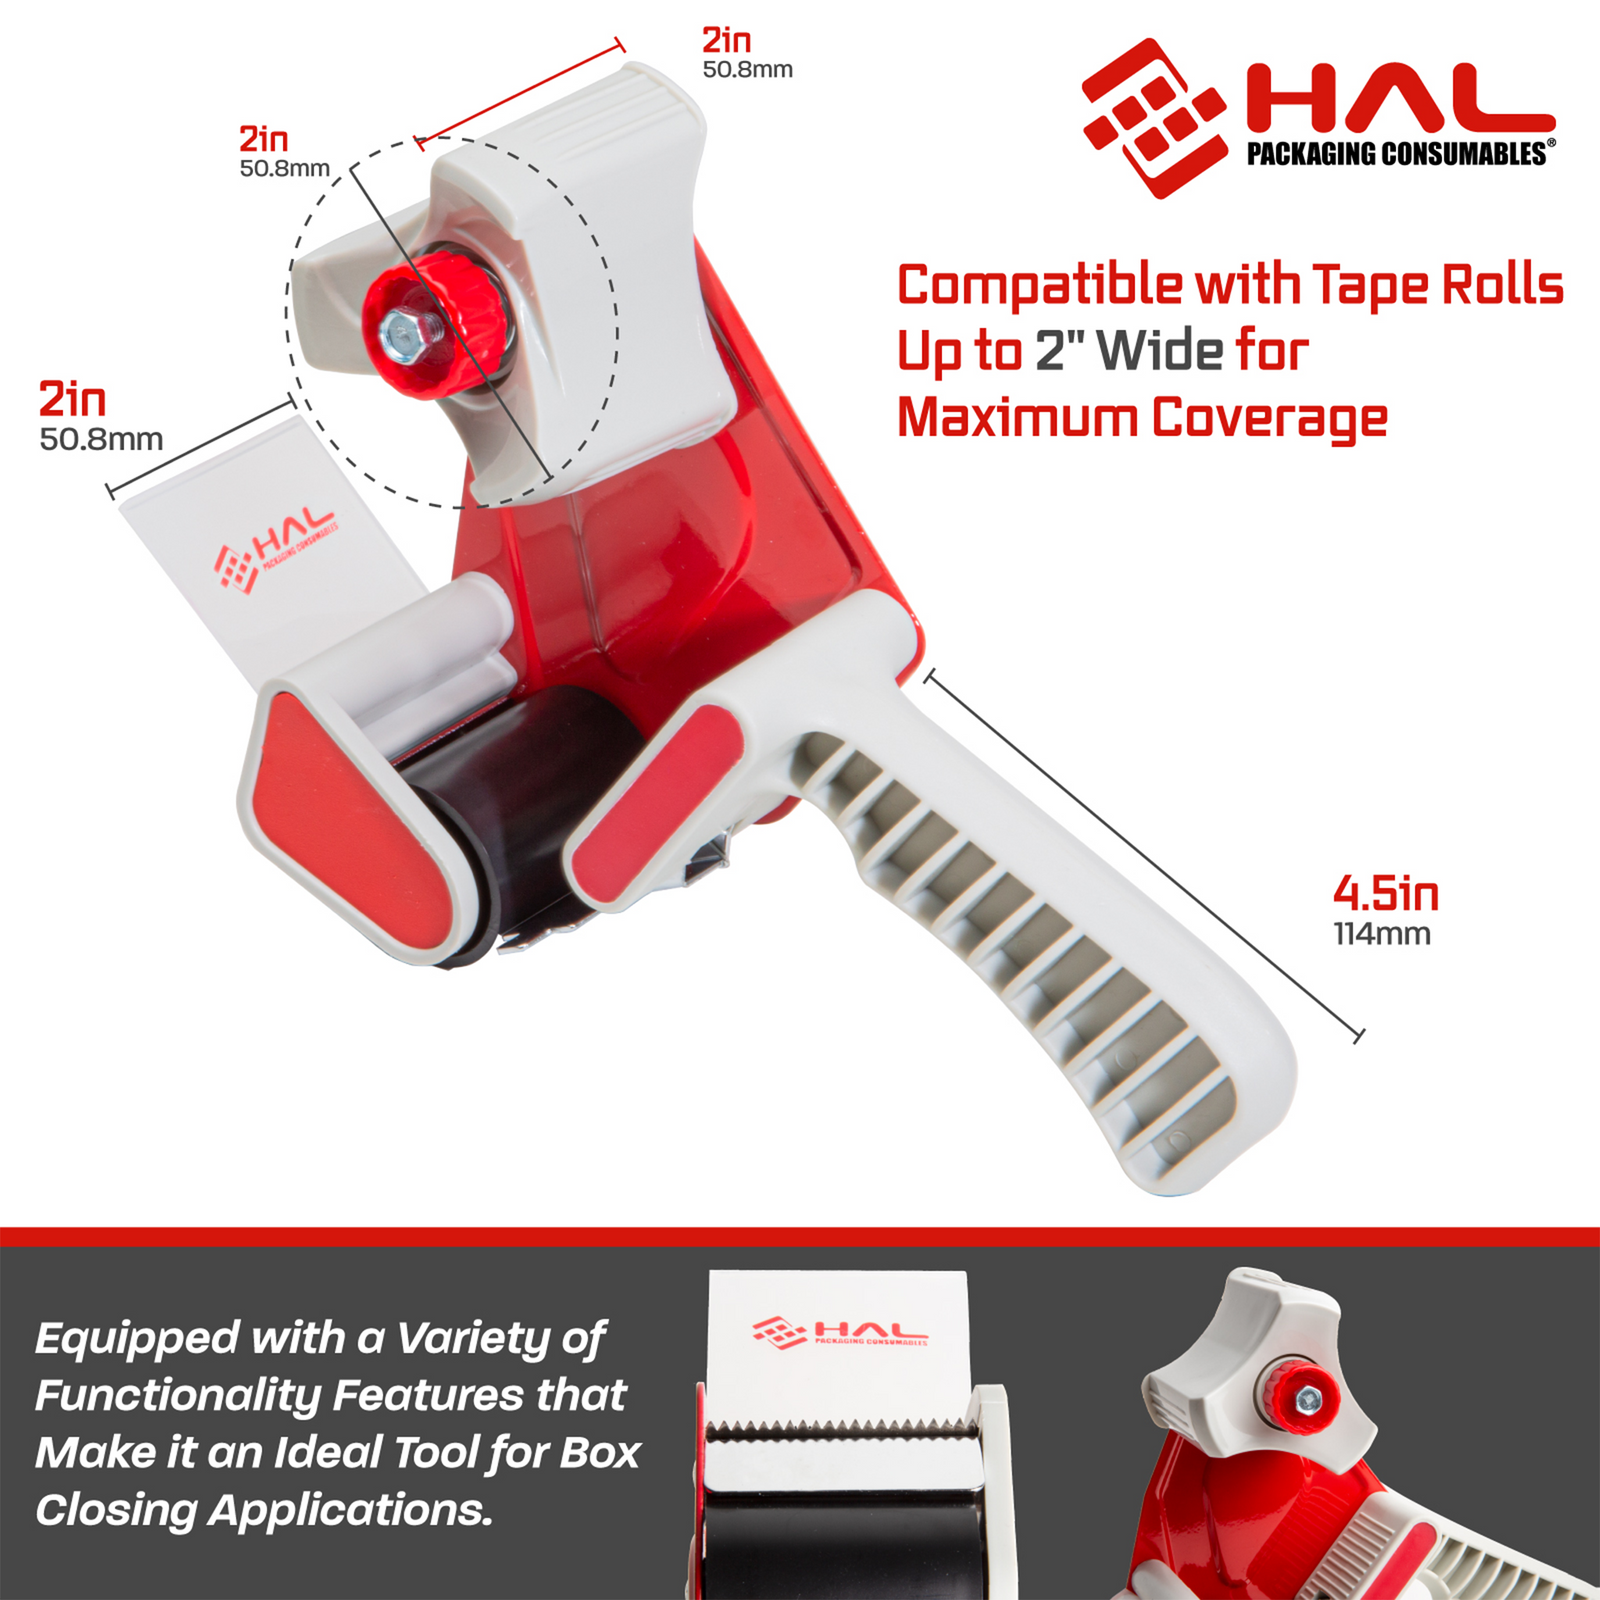 Diagram showing tape dimensions compatible with white and red tape dispenser in red text